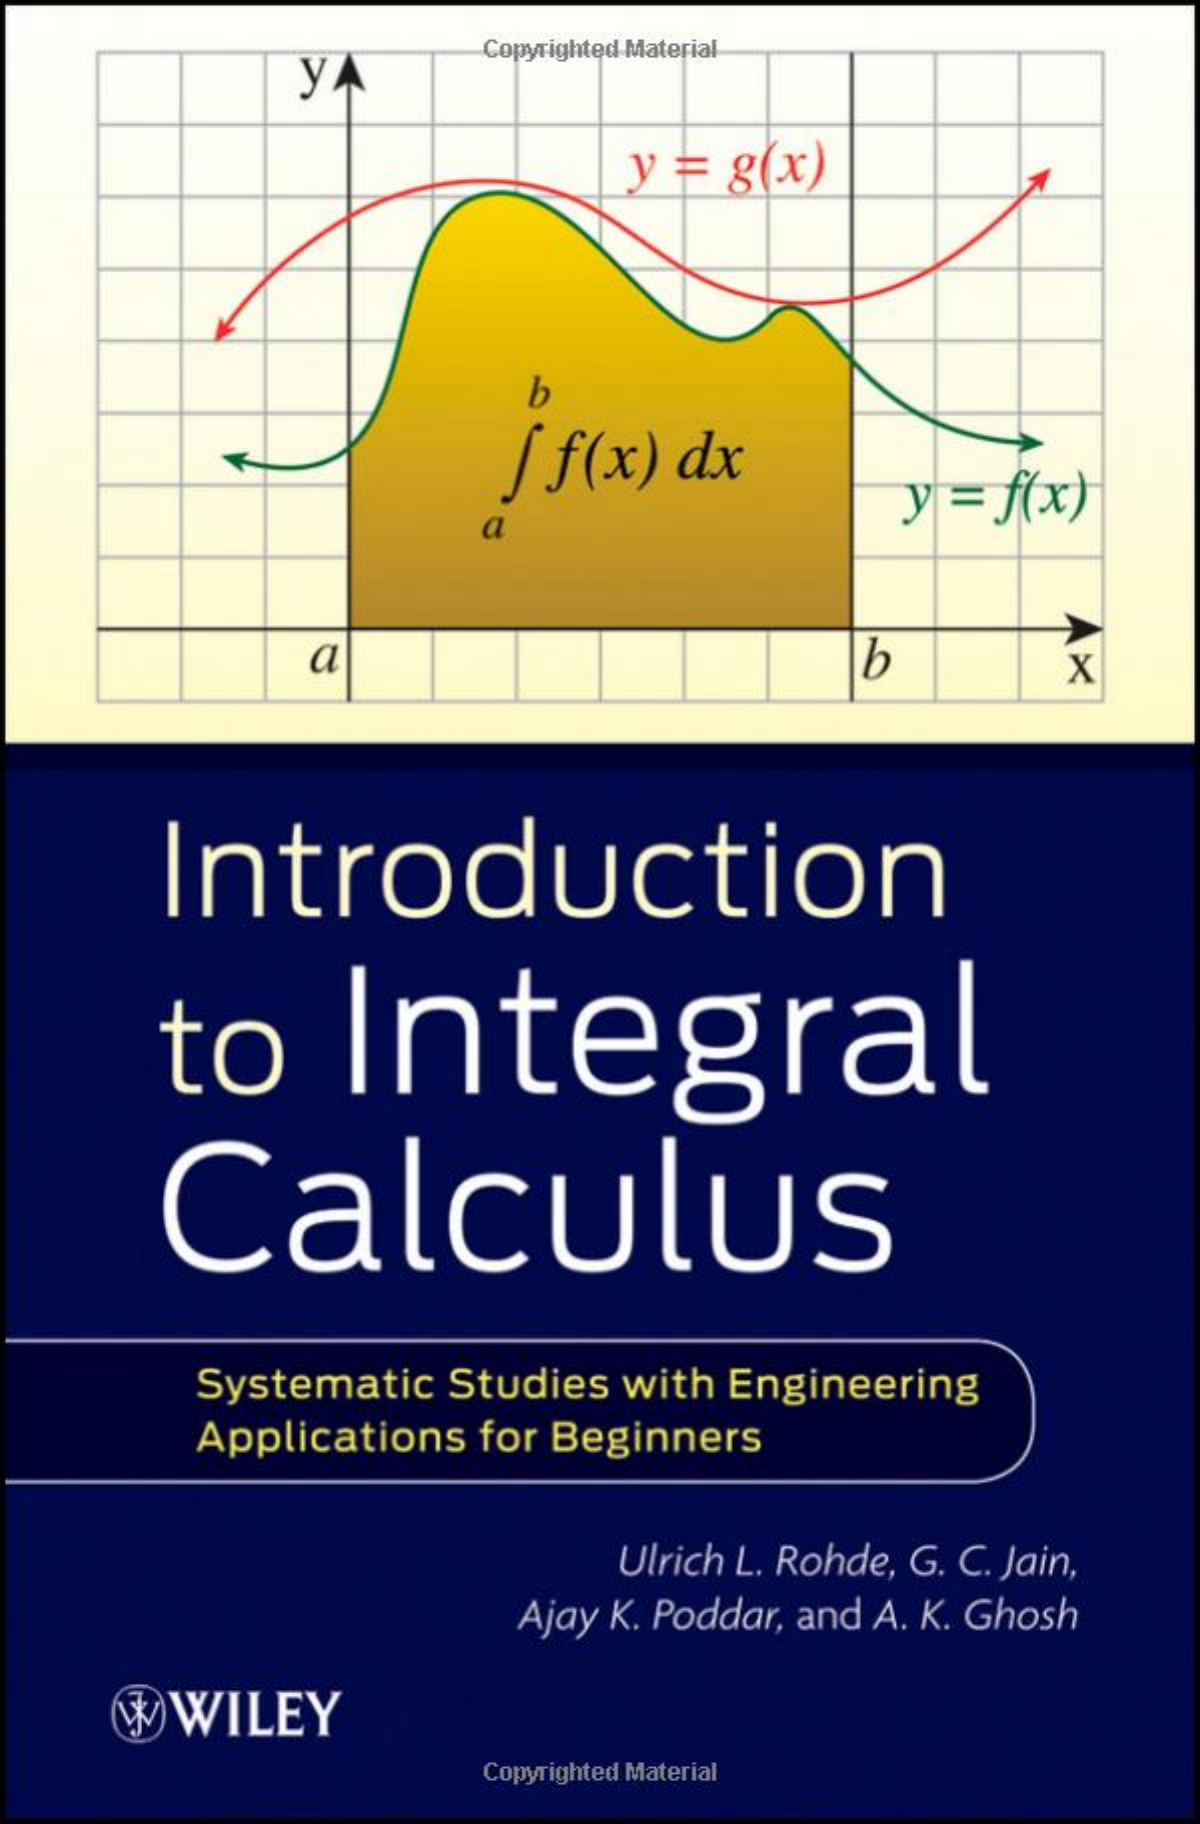 Introduction To Integral Calculus Systematic Studies With Engineering Applications For Beginners By Ulrich L Rohde G C Jain Ajay K Poddar A K Ghosh Matematica 15